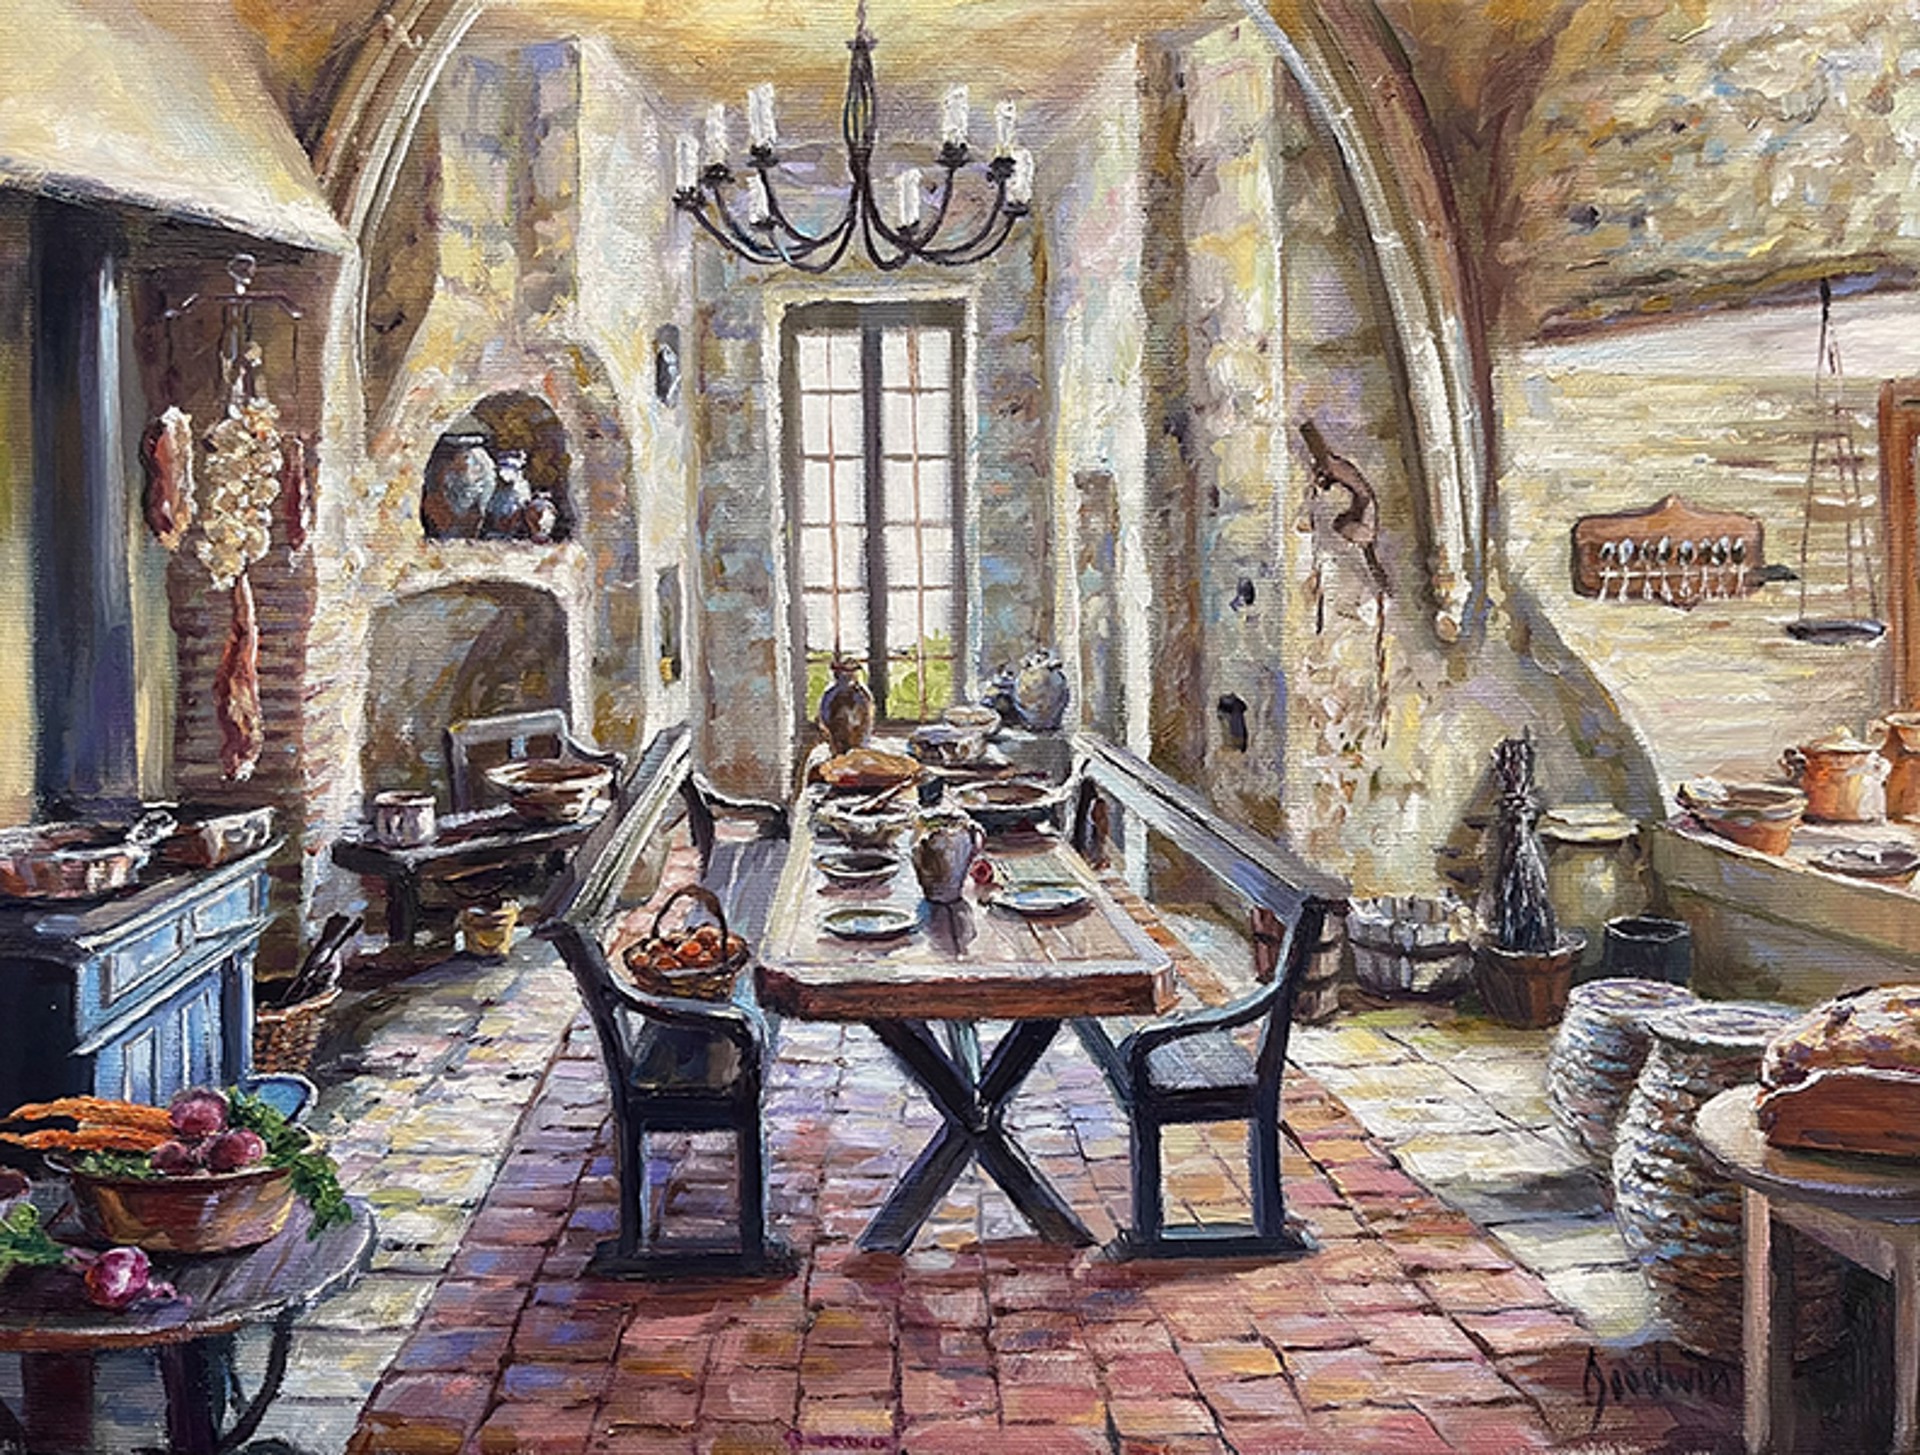 Stone Kitchen of Chateau Meung-sur-Loire, France by Lindsay Goodwin